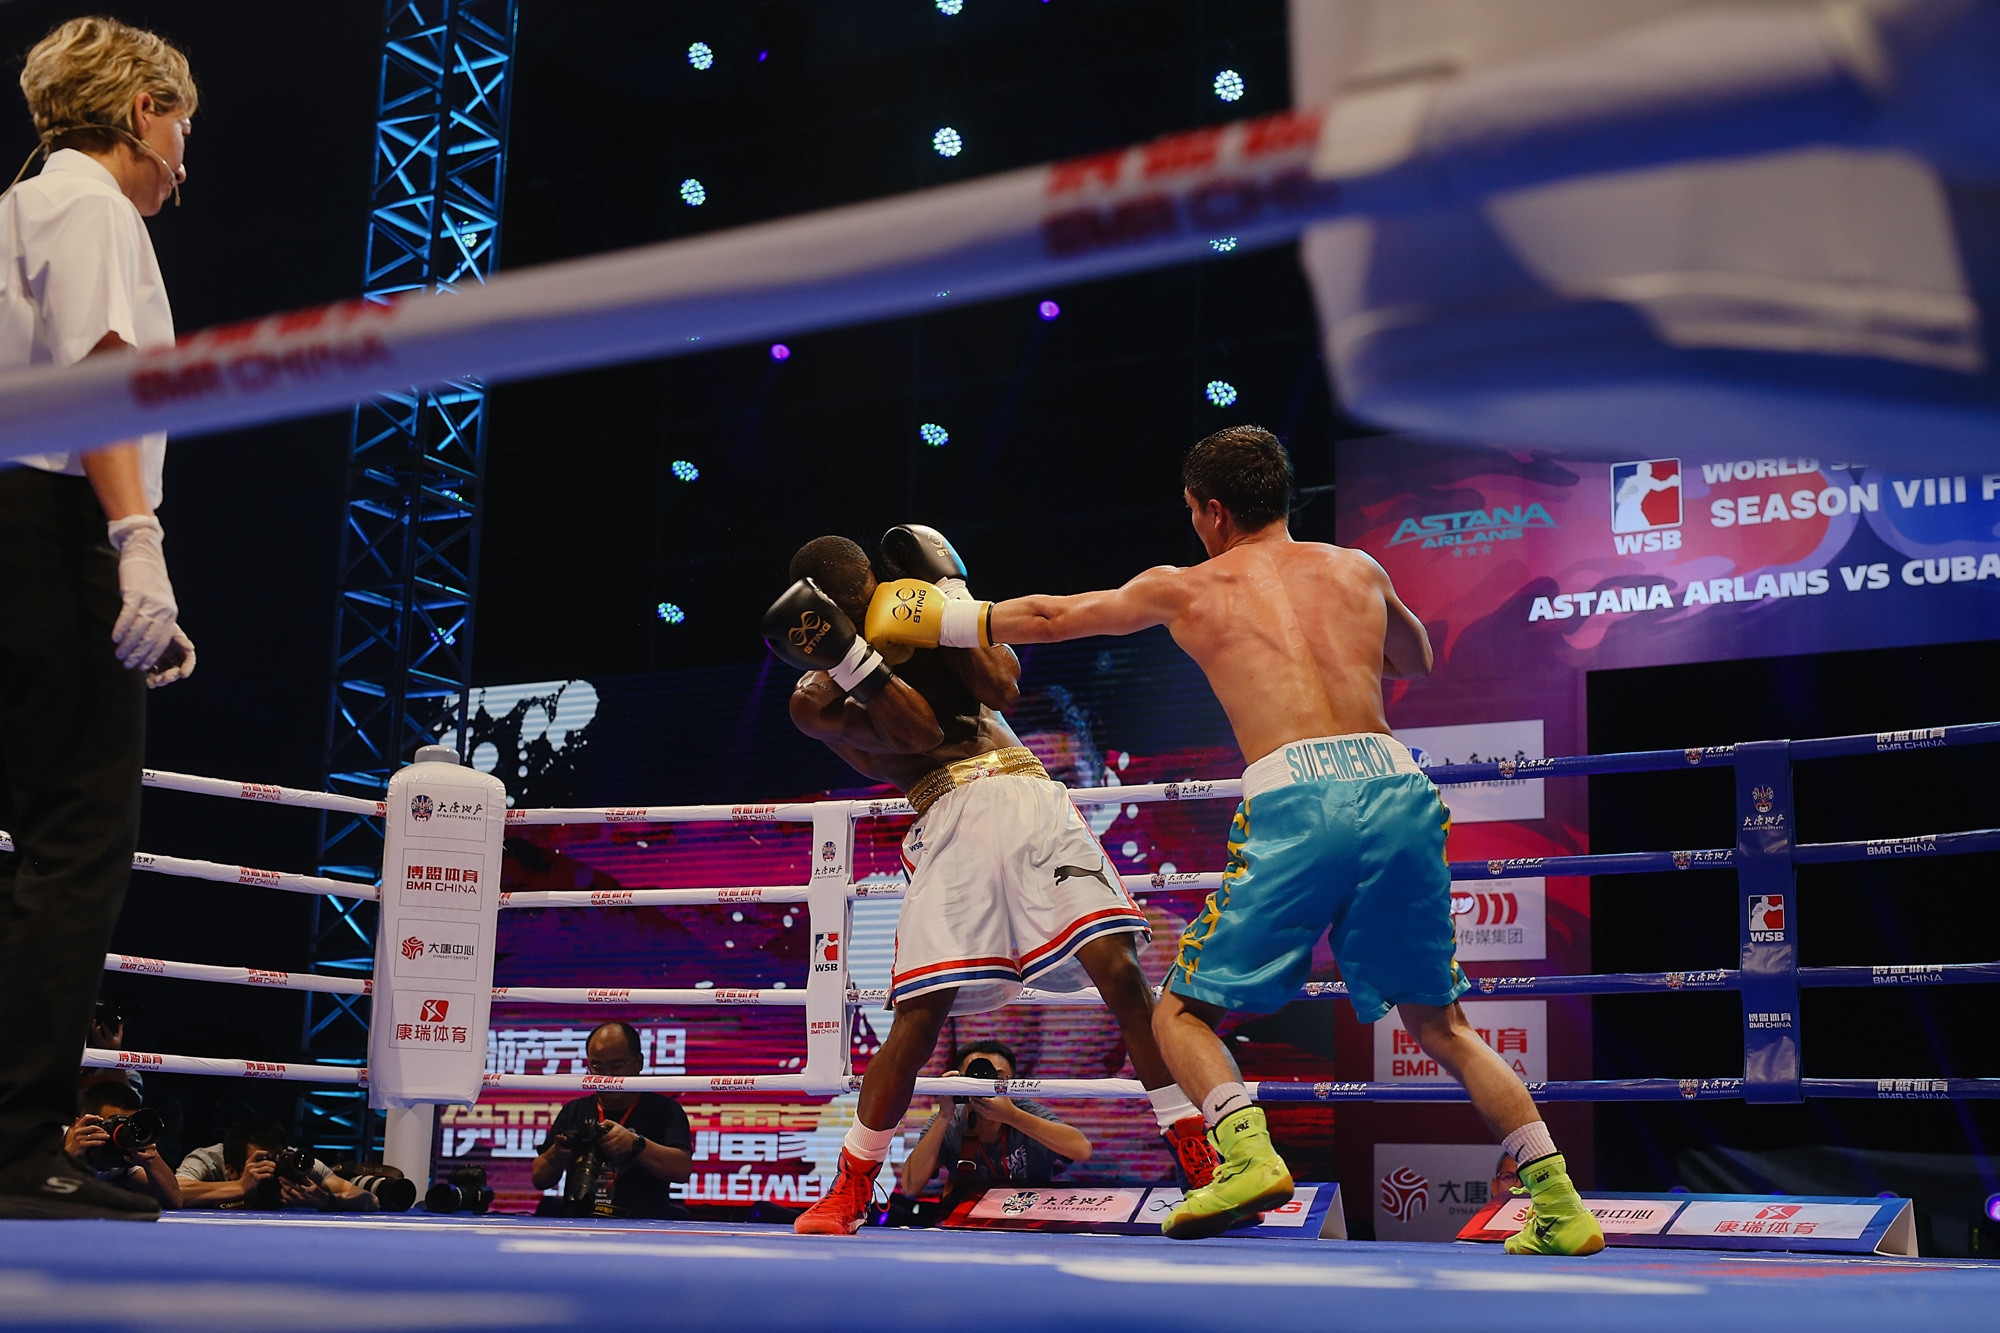 World Series of Boxing set to collapse as AIBA confirm event is "inactive"